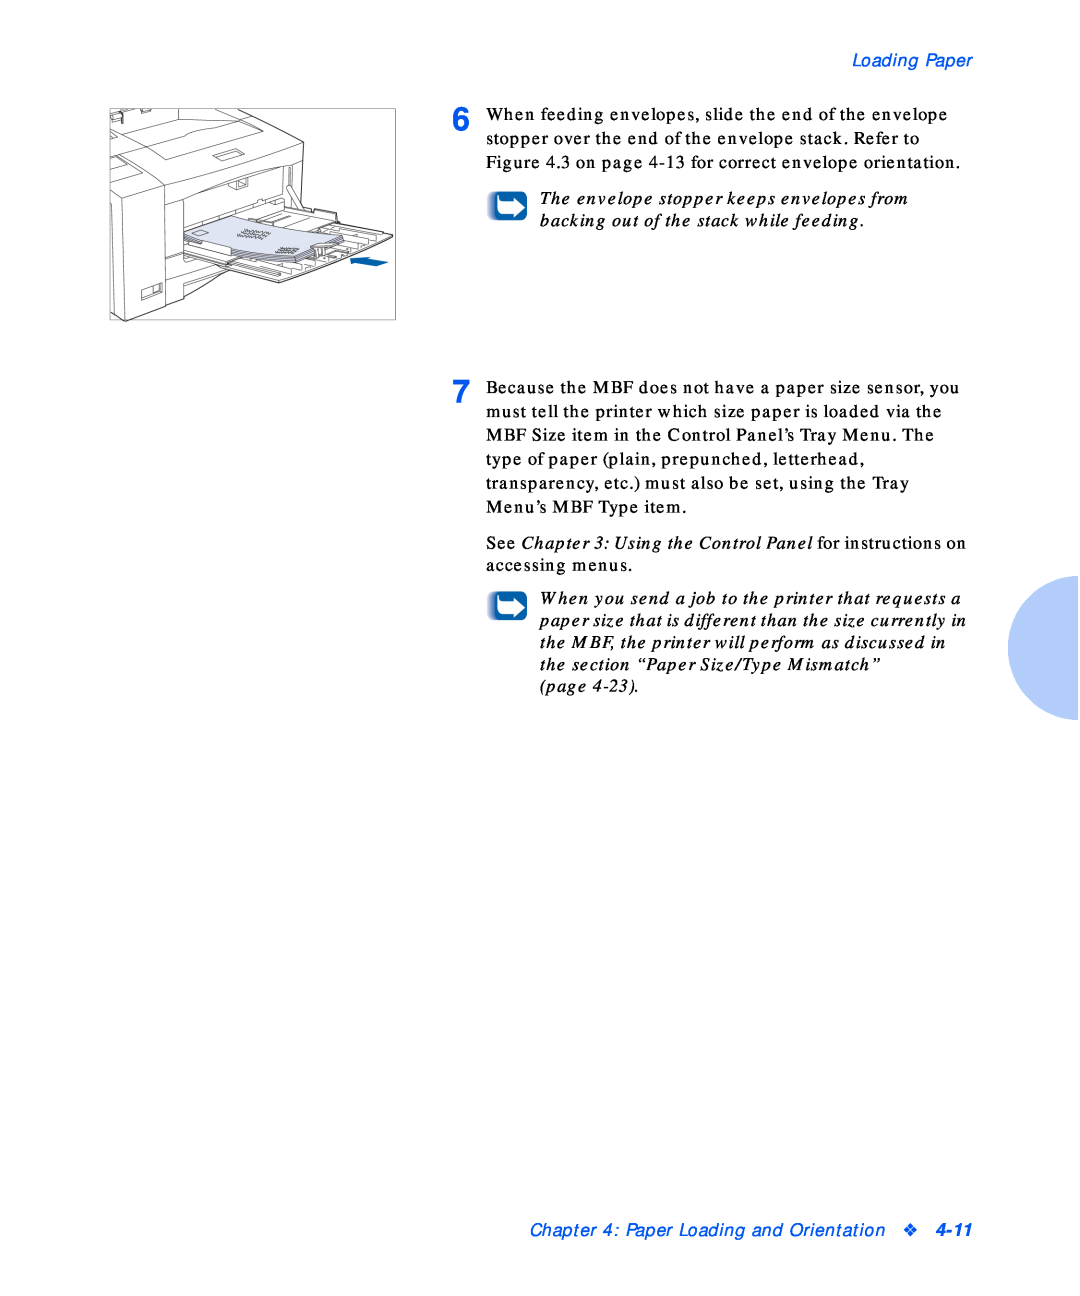 Xerox N17b manual Loading Paper, page, Paper Loading and Orientation 